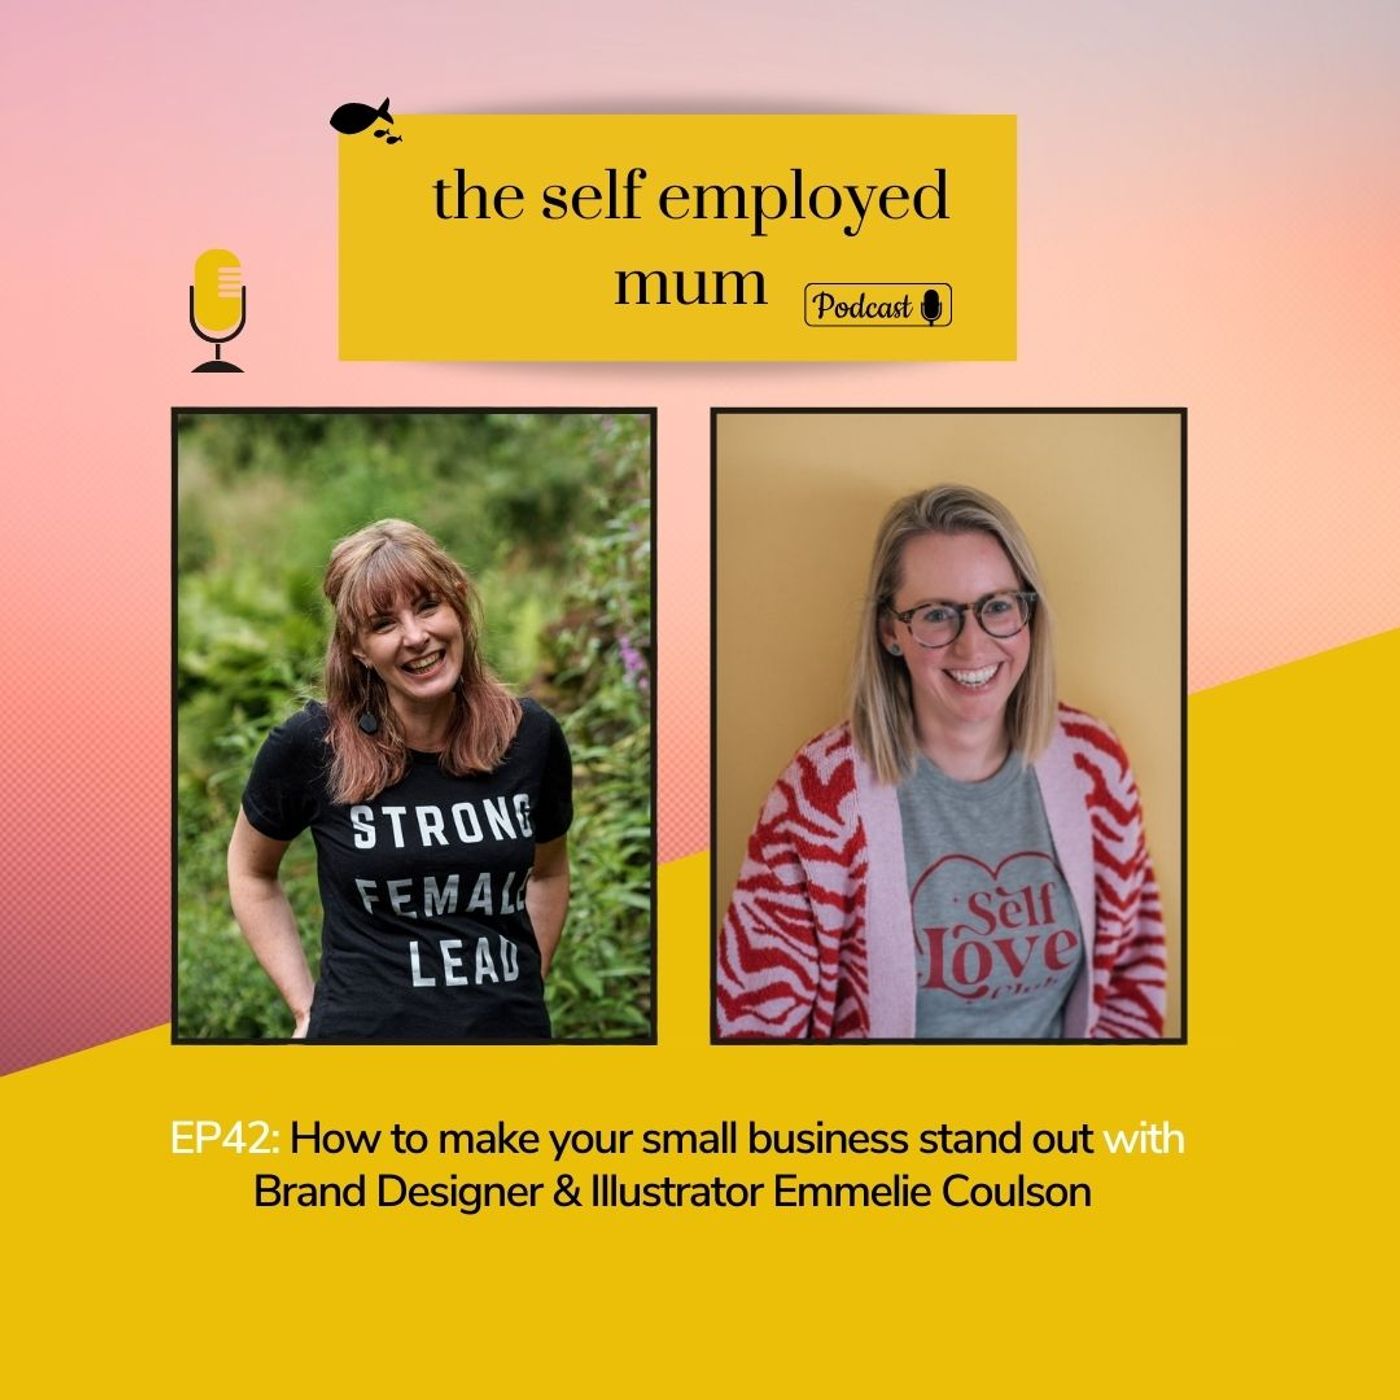 EP42: How to make your small business stand out with Brand Designer & Illustrator Emmelie Coulson